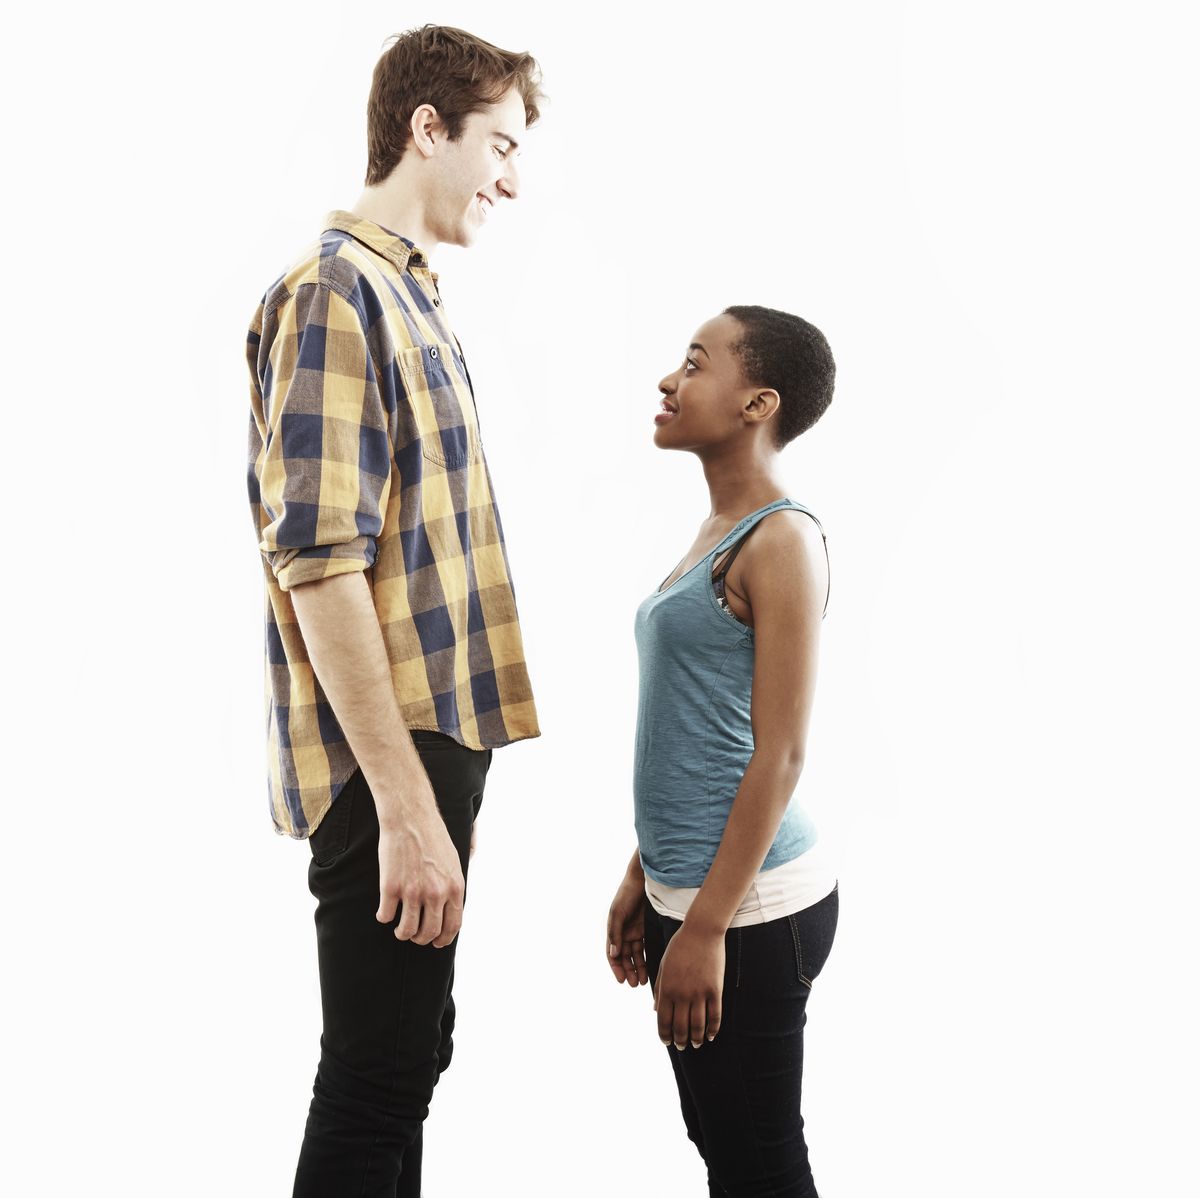 Short People Save the Planet: Scientific Benefits of Being Small